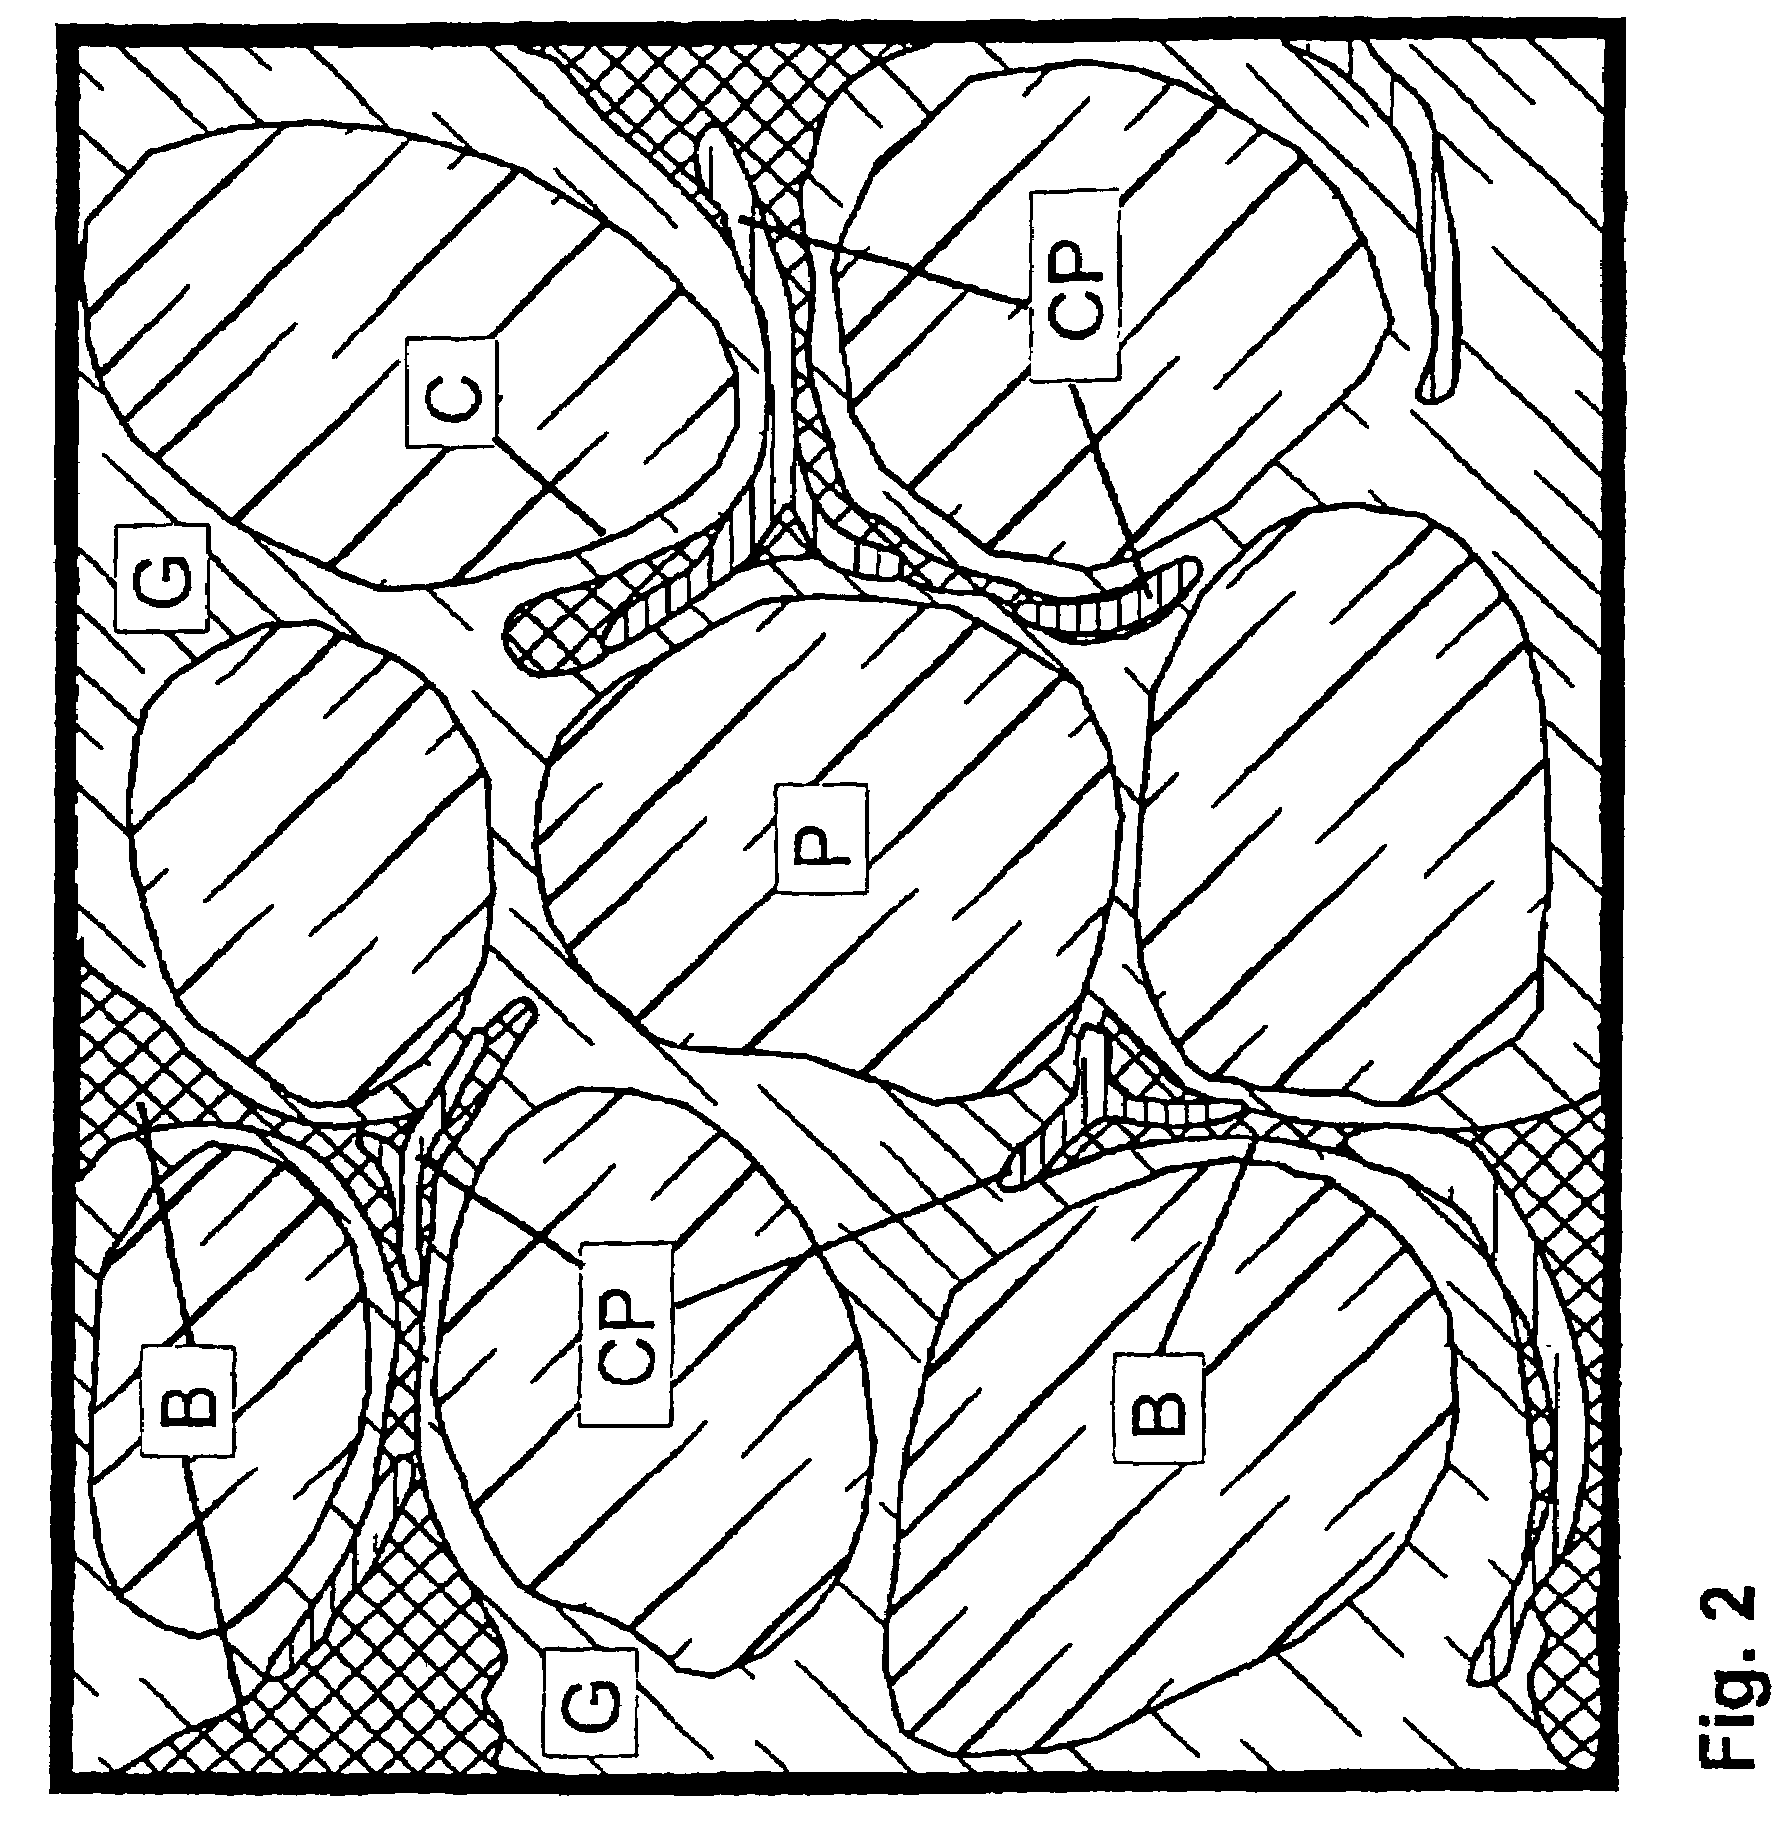 Method for manufacturing particles for use in forming a resorbable implant for stimulating bone growth